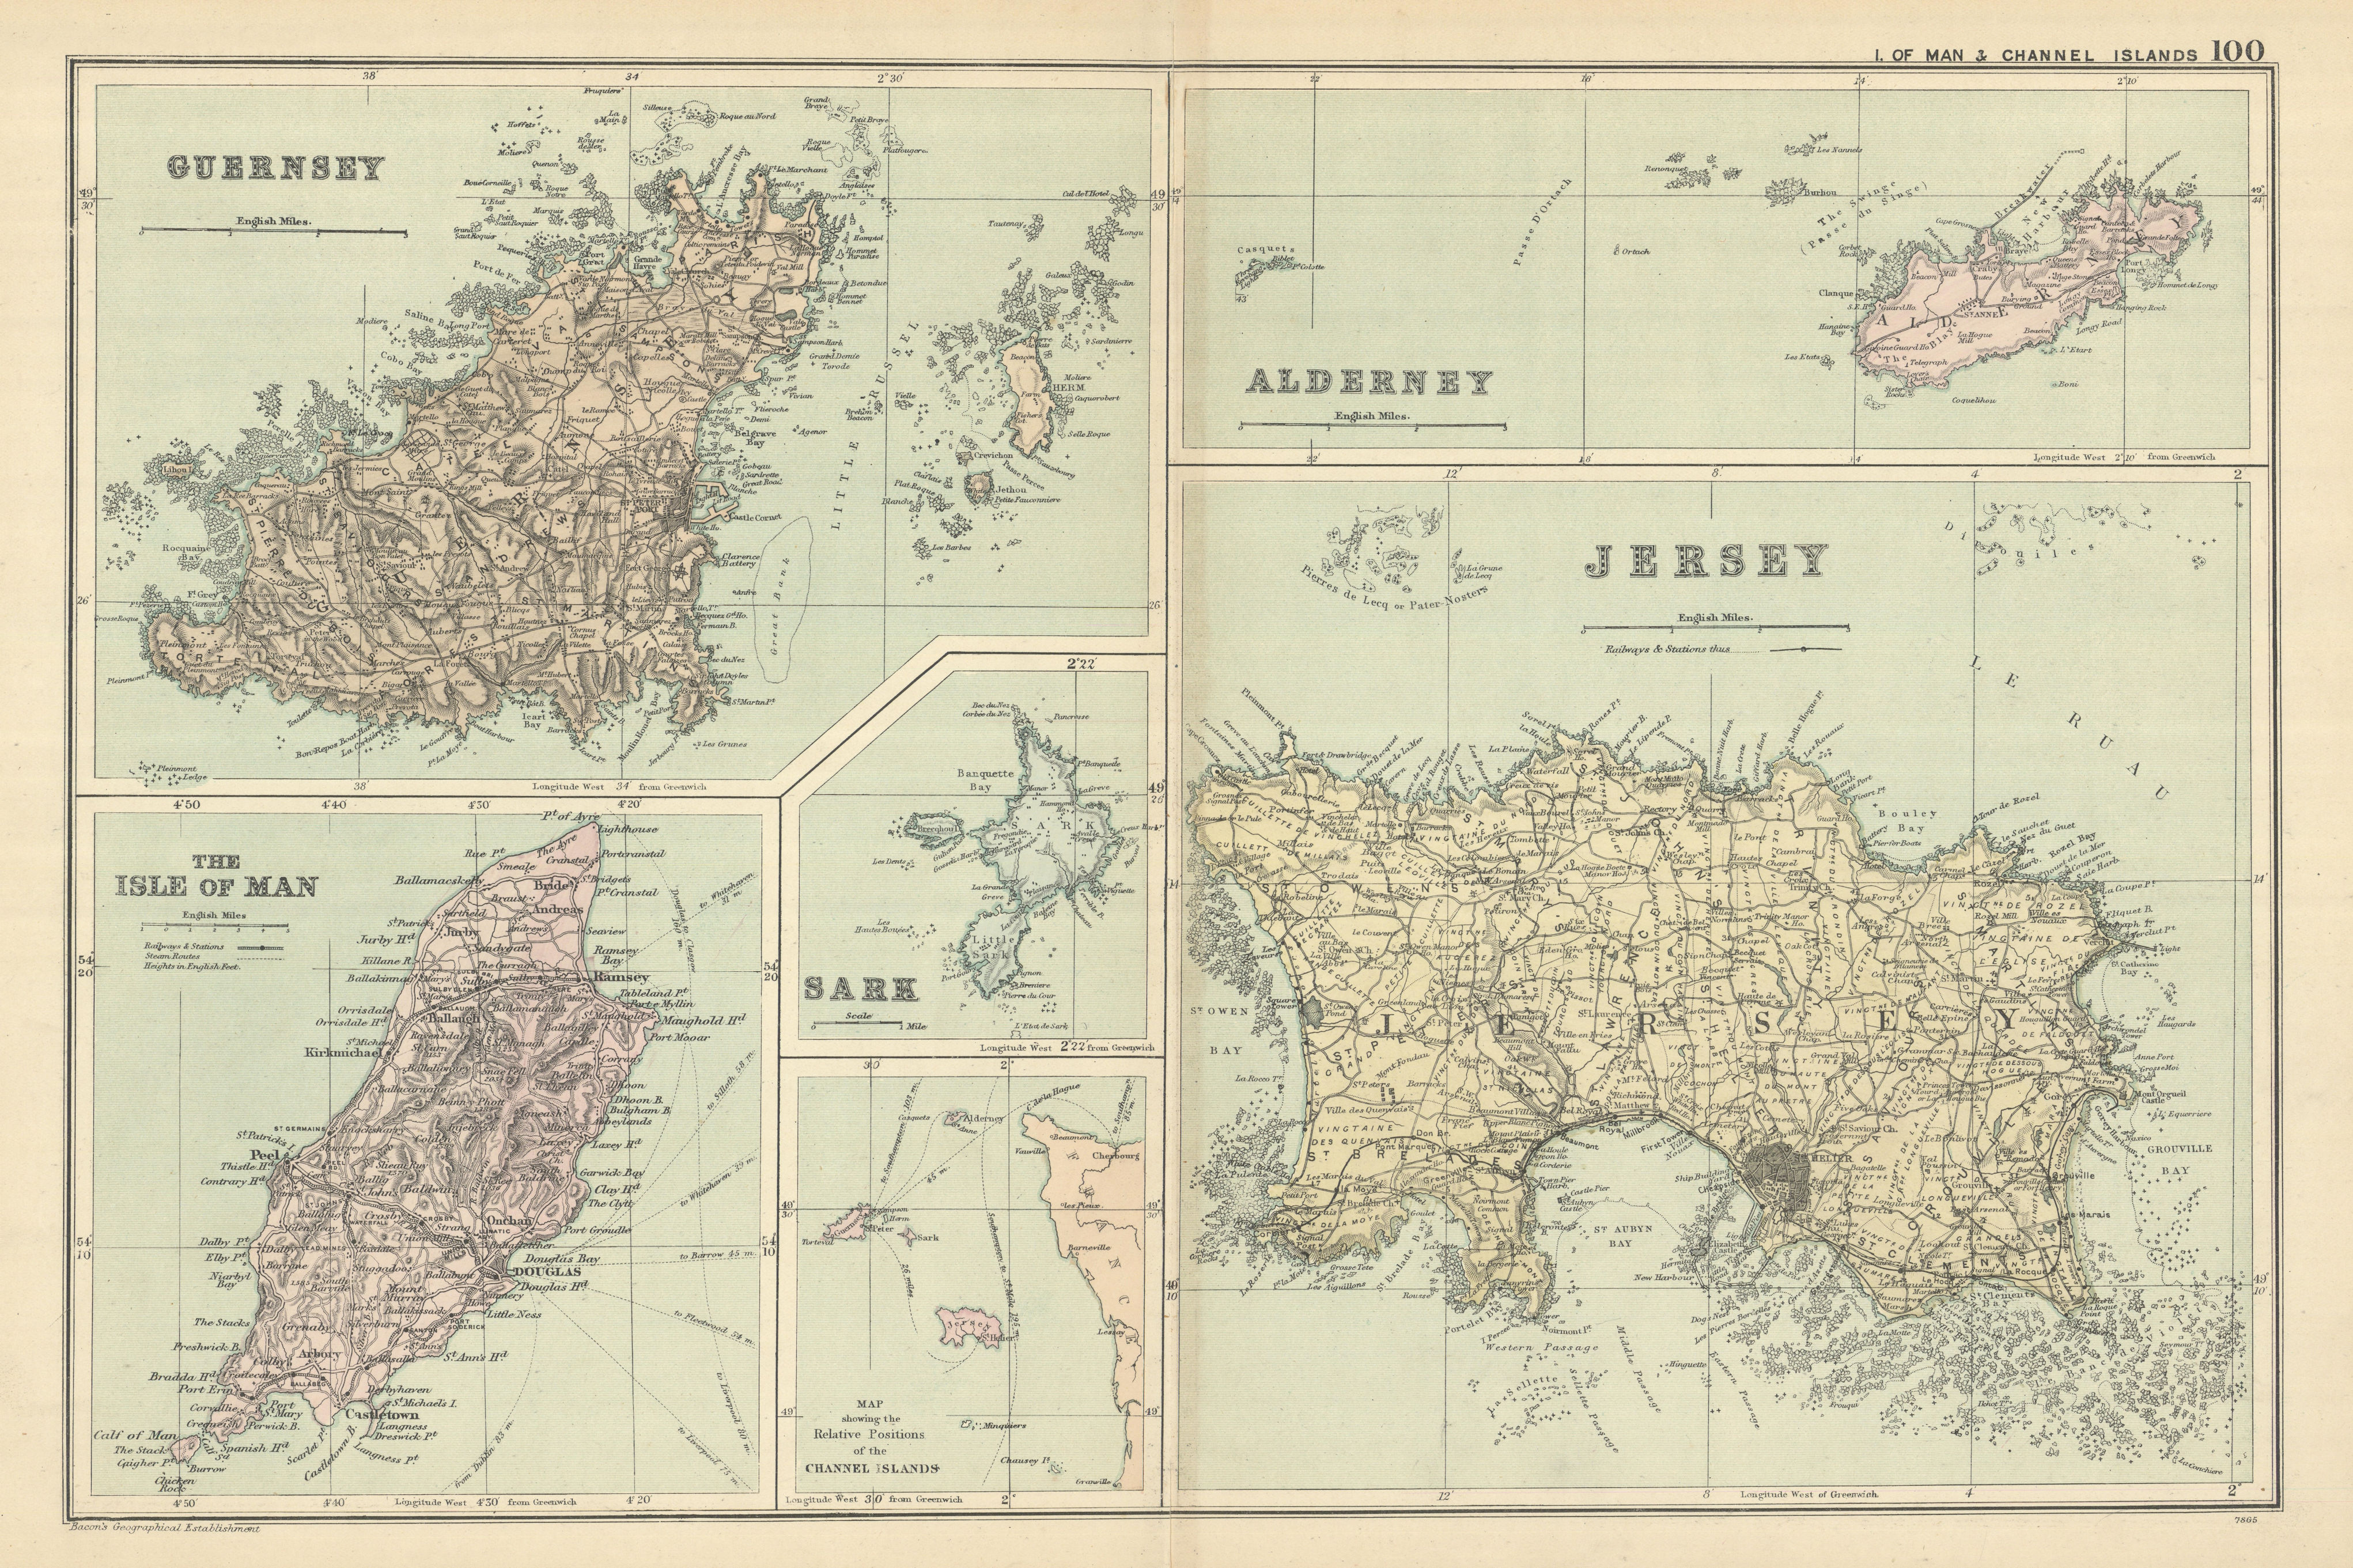 Associate Product CHANNEL ISLANDS & ISLE OF MAN Alderney Guernsey Jersey Sark by GW BACON 1898 map